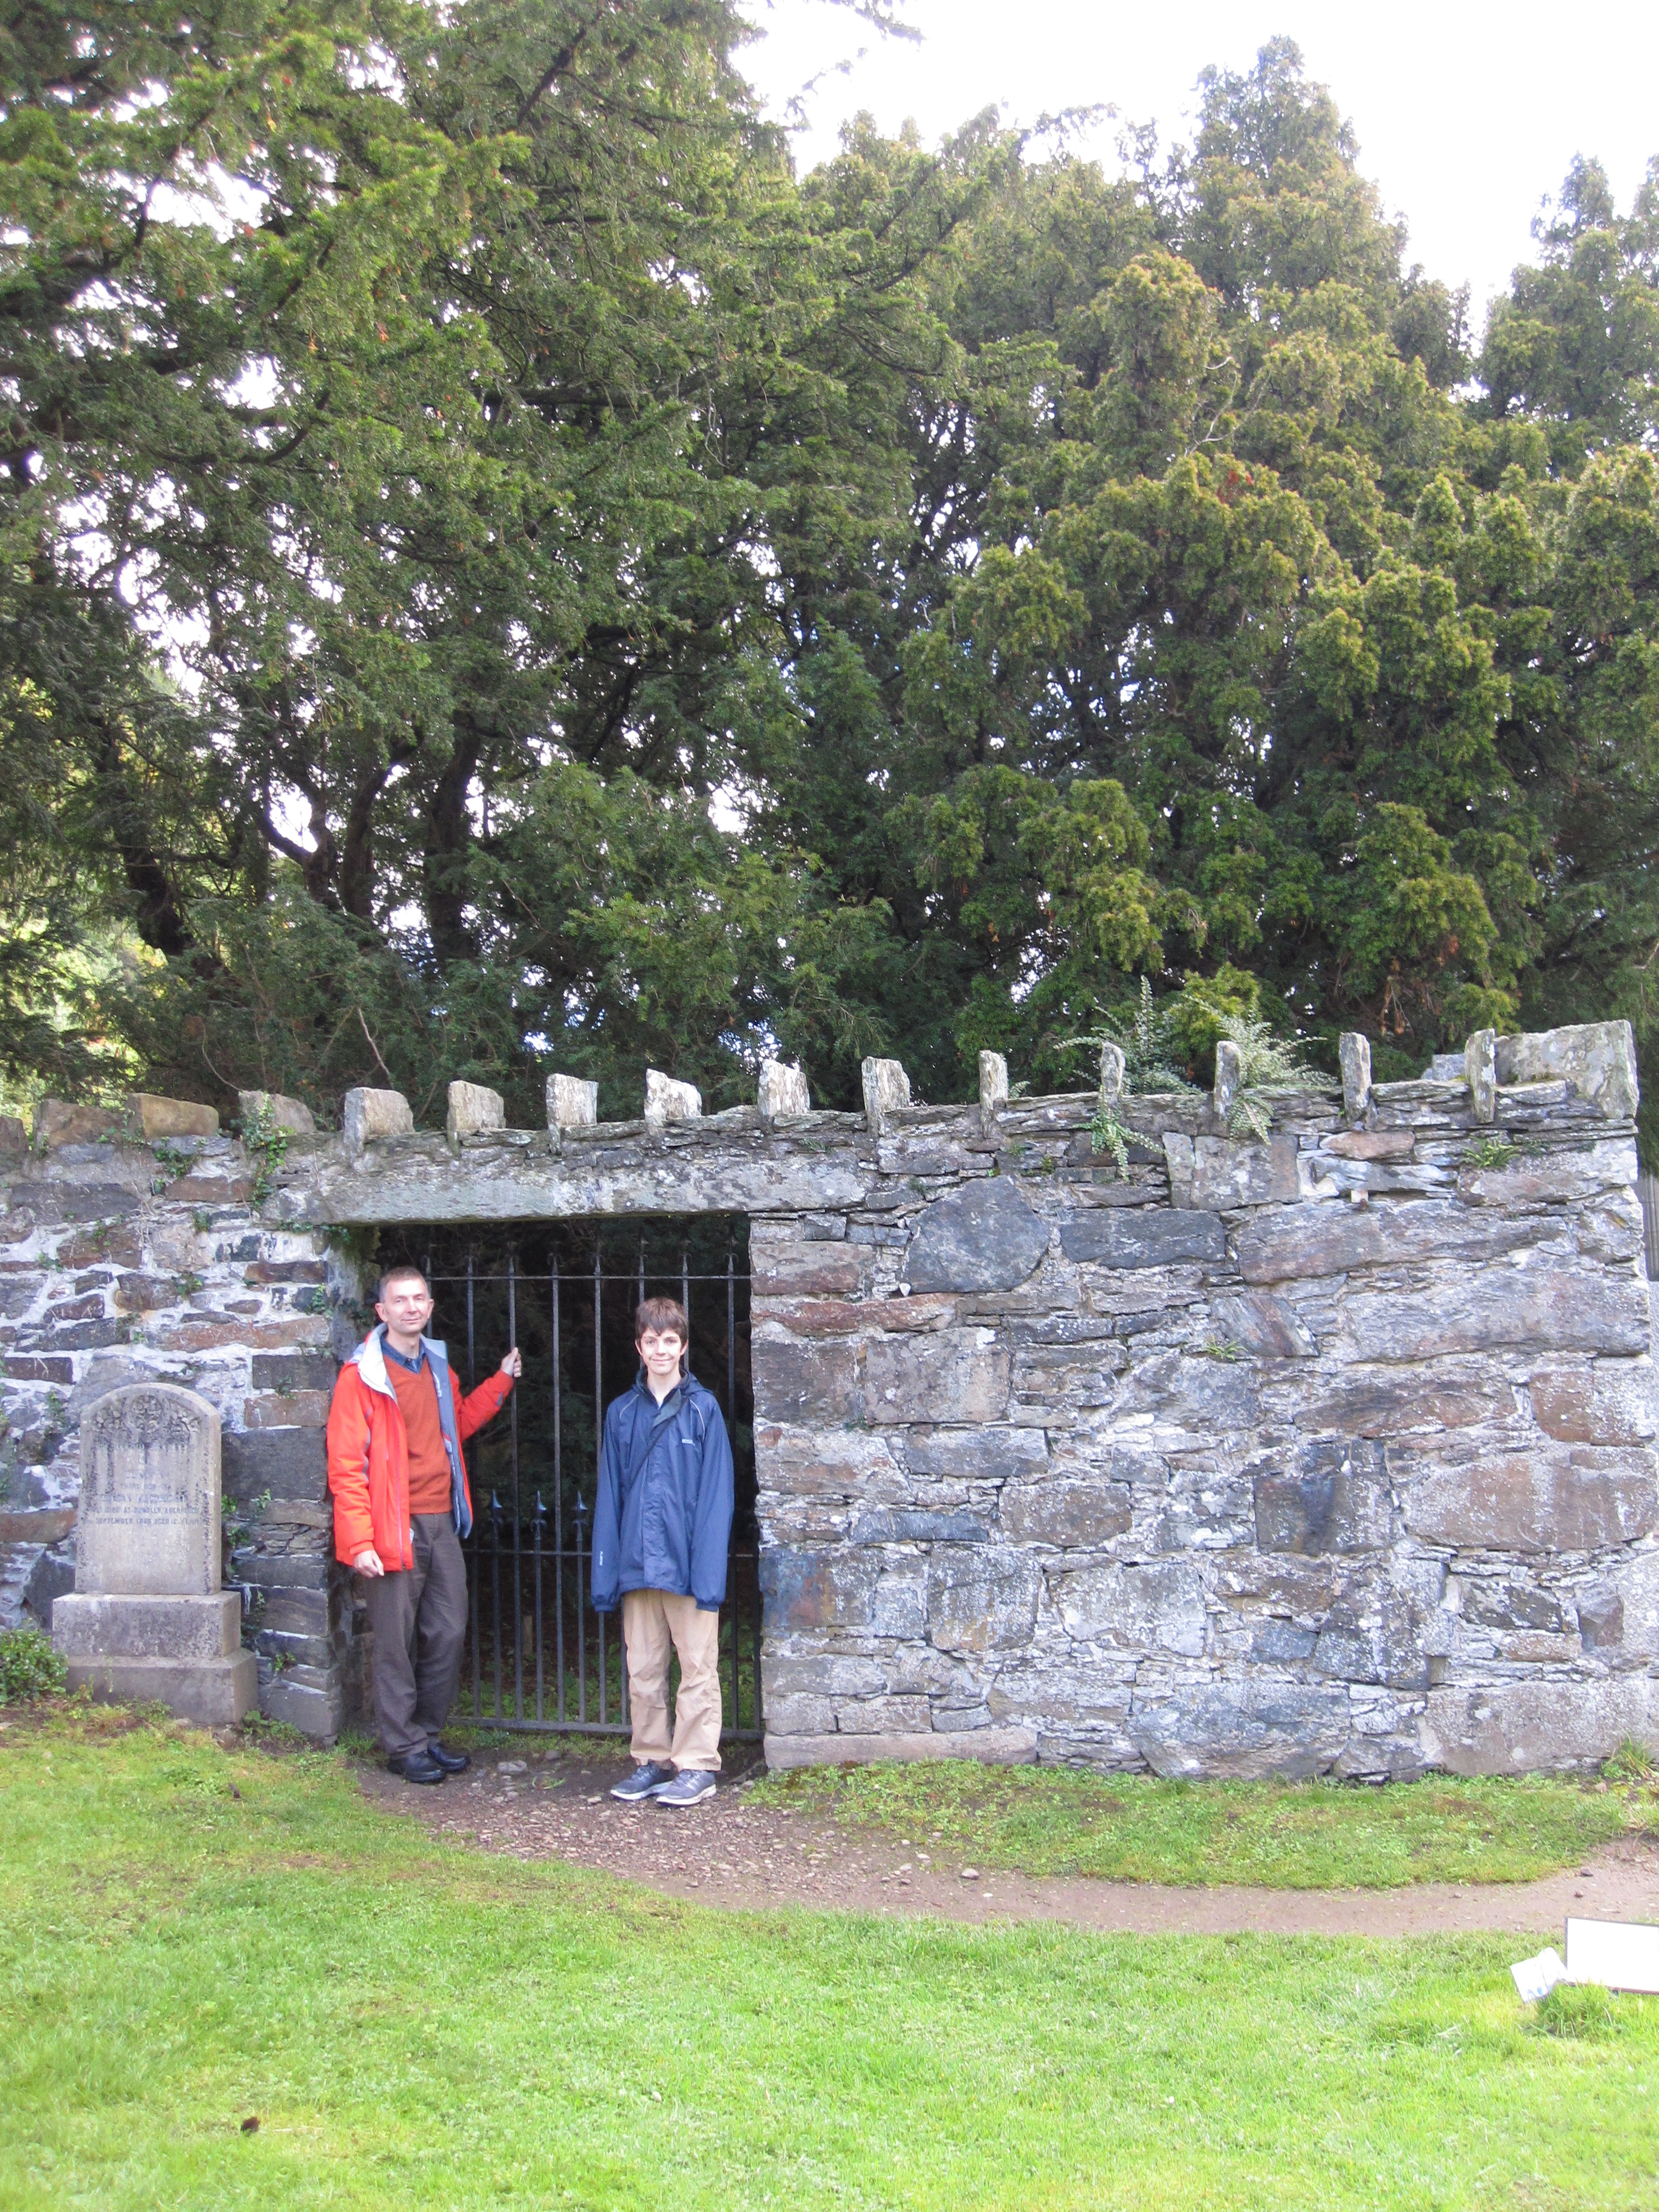 A visit to the Fortingall Yew on 12th October 2015 when three yew berries were collected from one discreet part of the canopy.